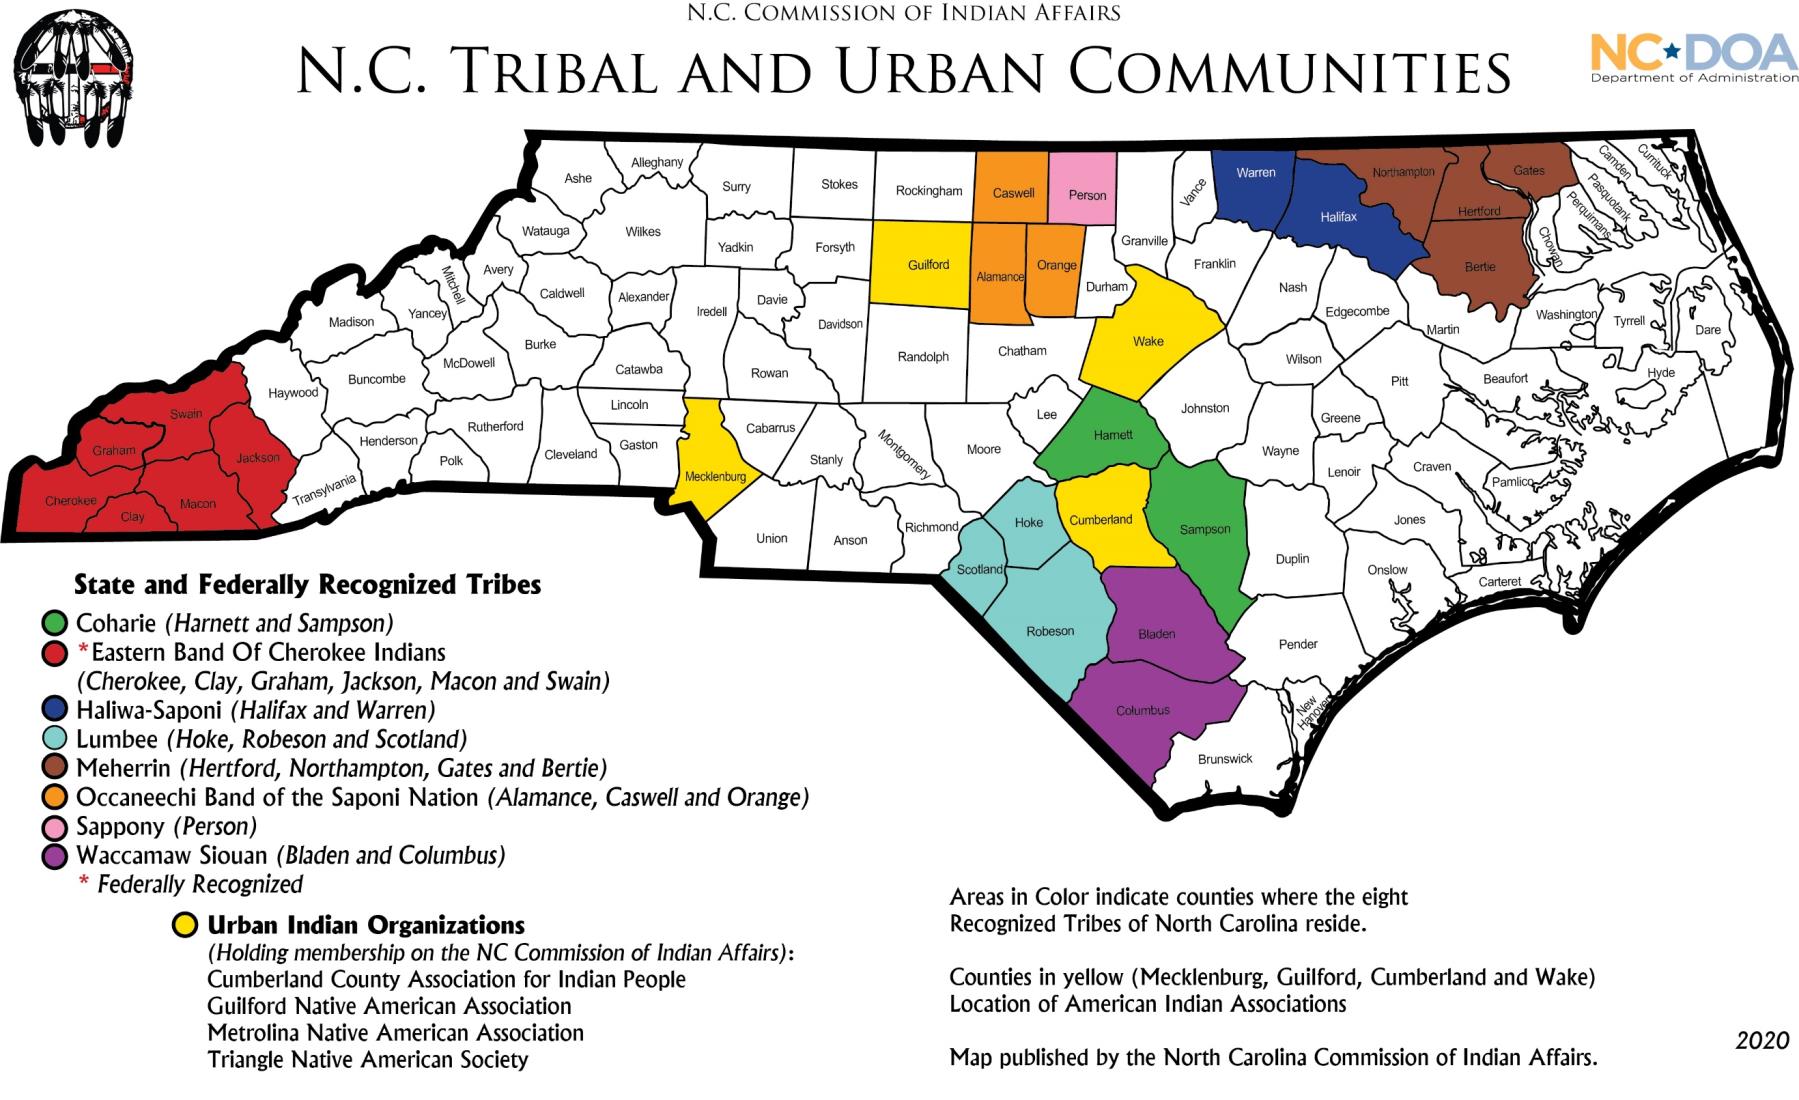 Map of N.C. Tribal and Urban Communities